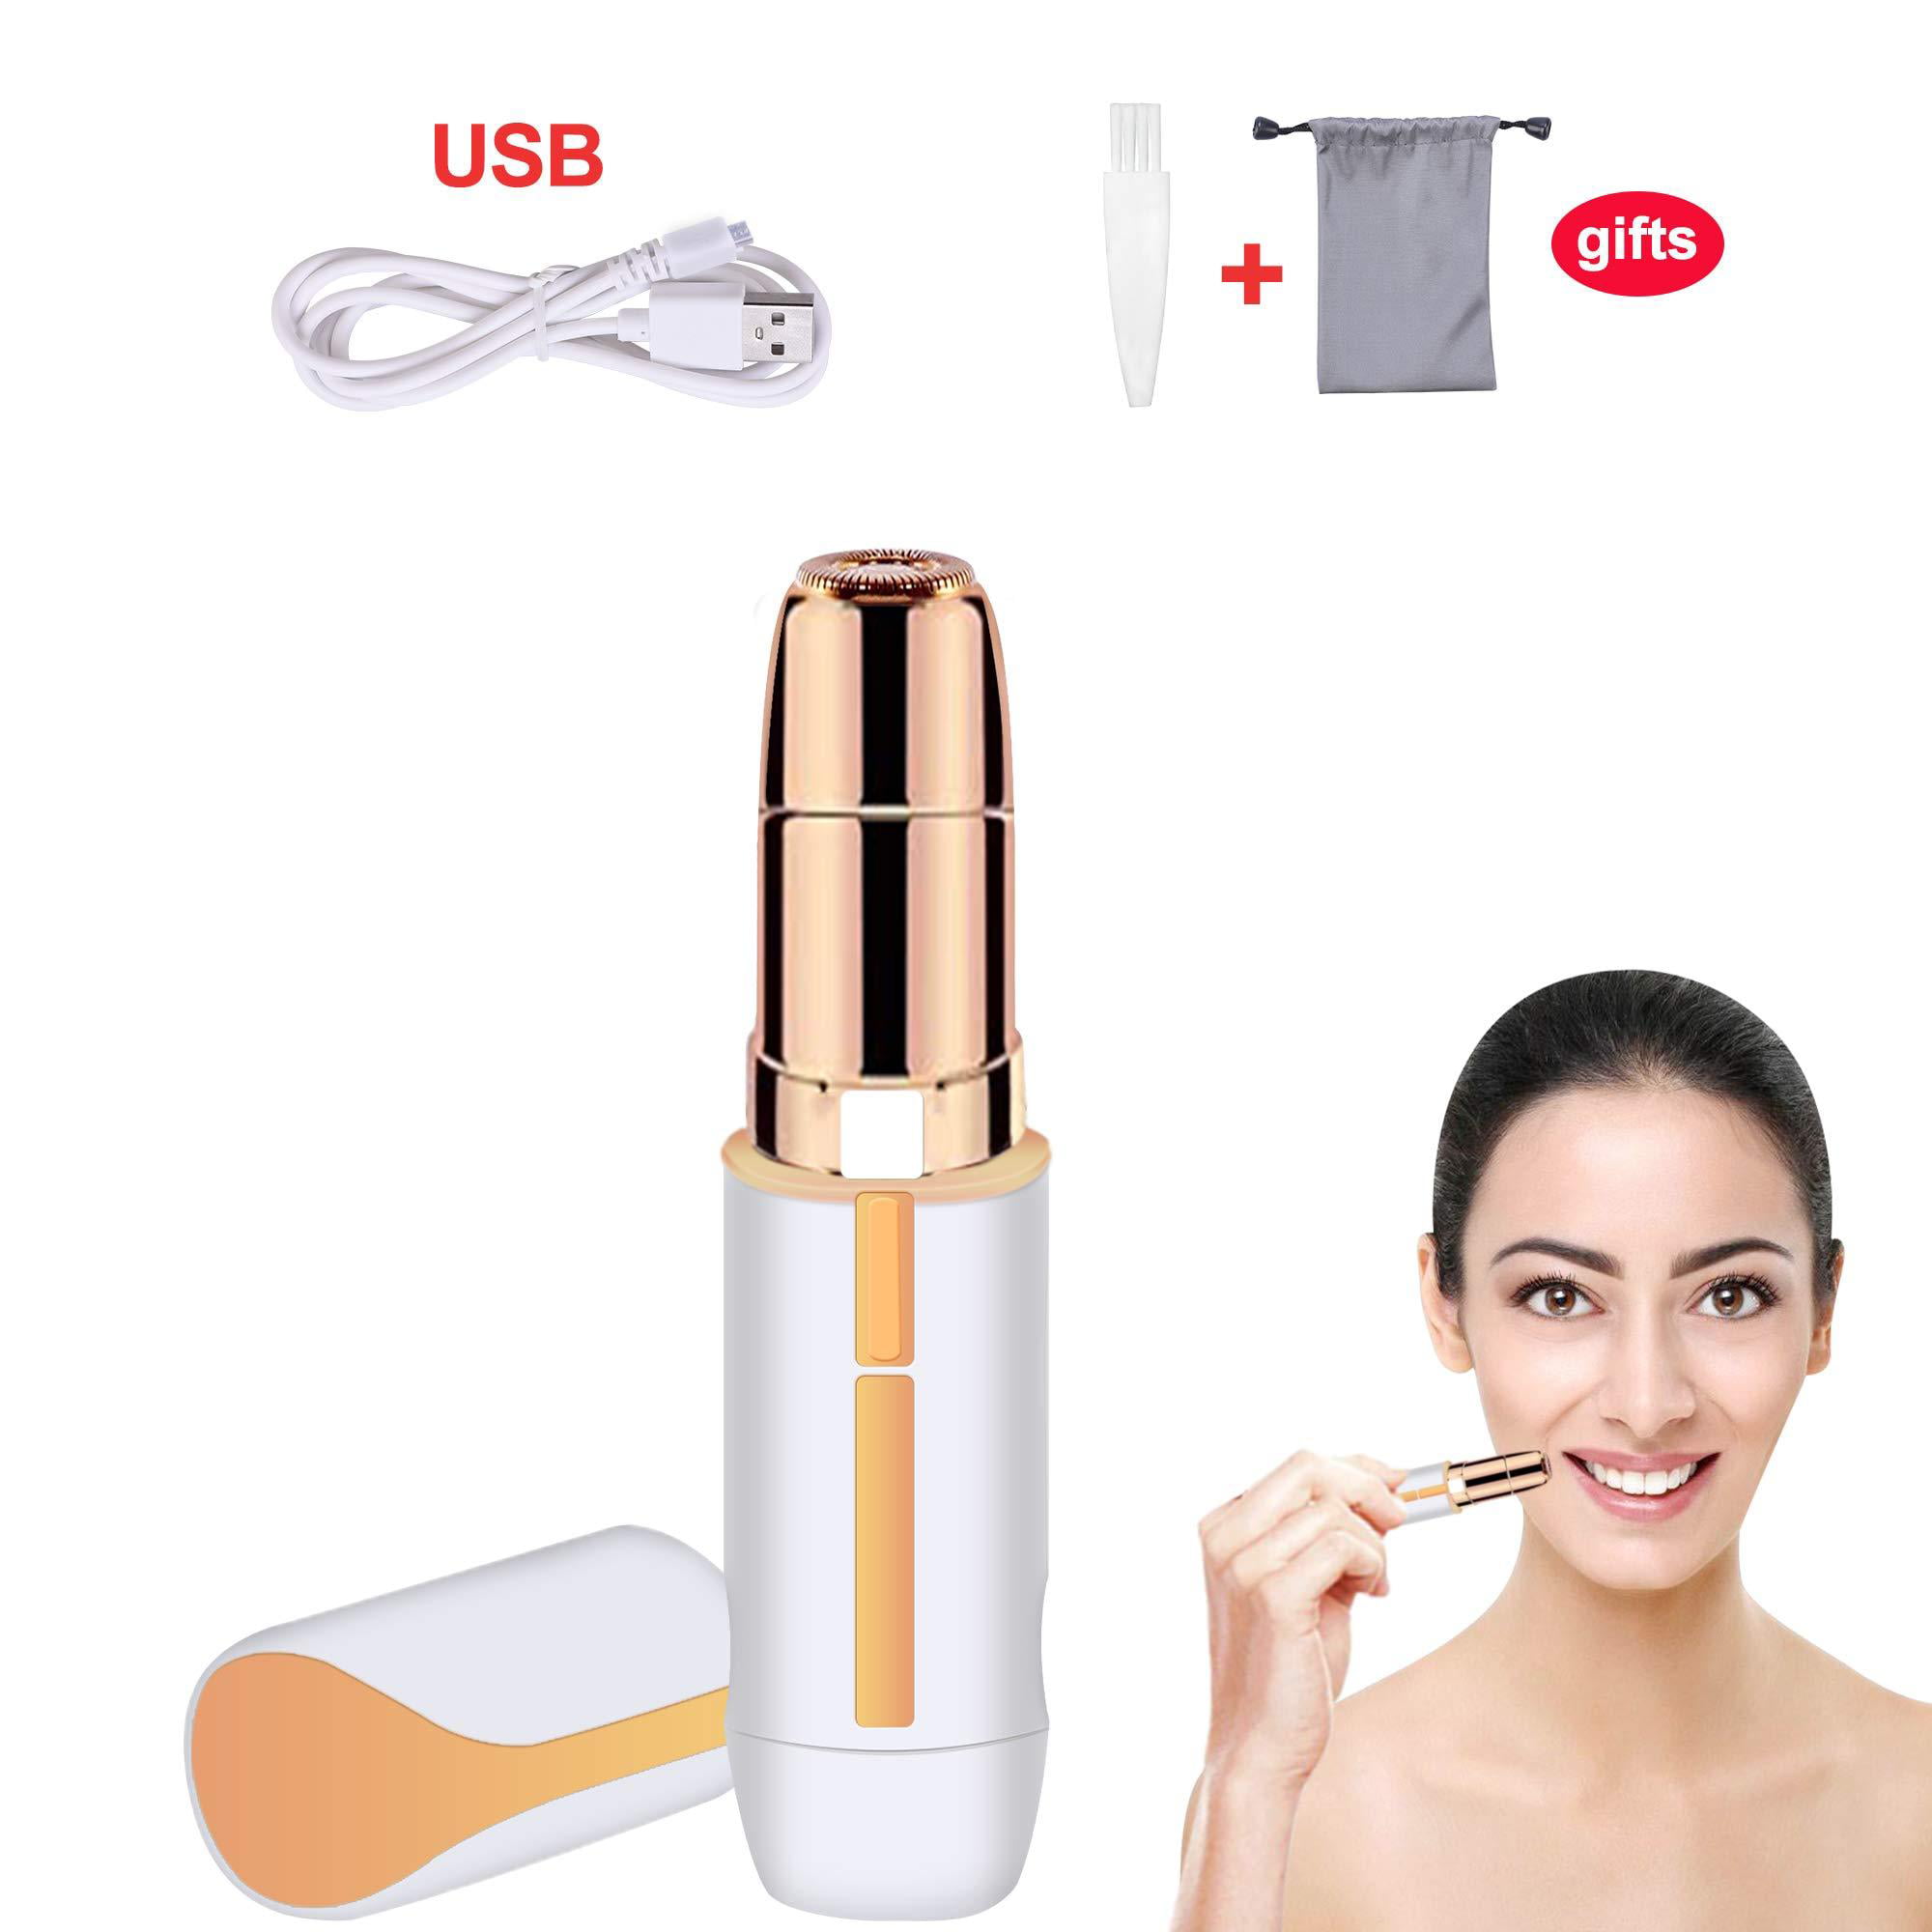 Best Facial Hair Remover For Women - 11 Best Facial Hair Removal ...